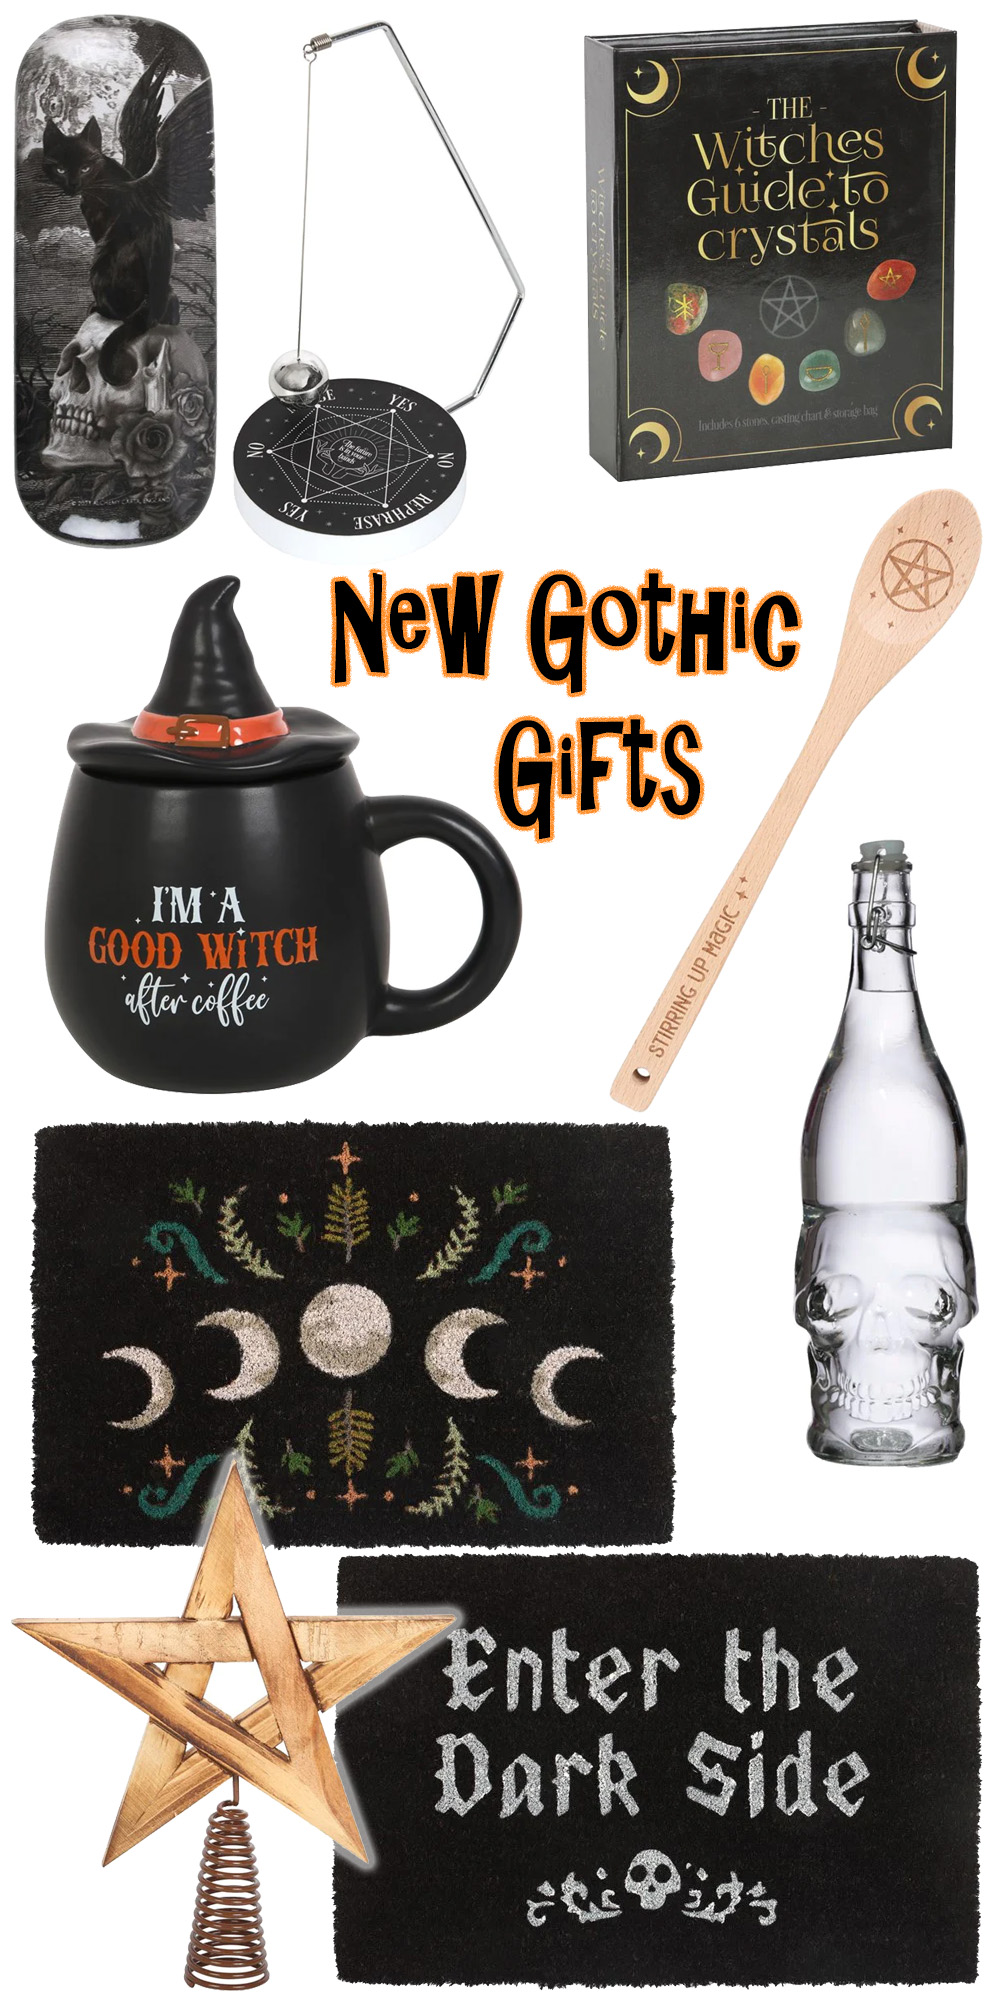 😍 New Hot Chocolate and Gothic Gifts 👇 - Kate's Clothing